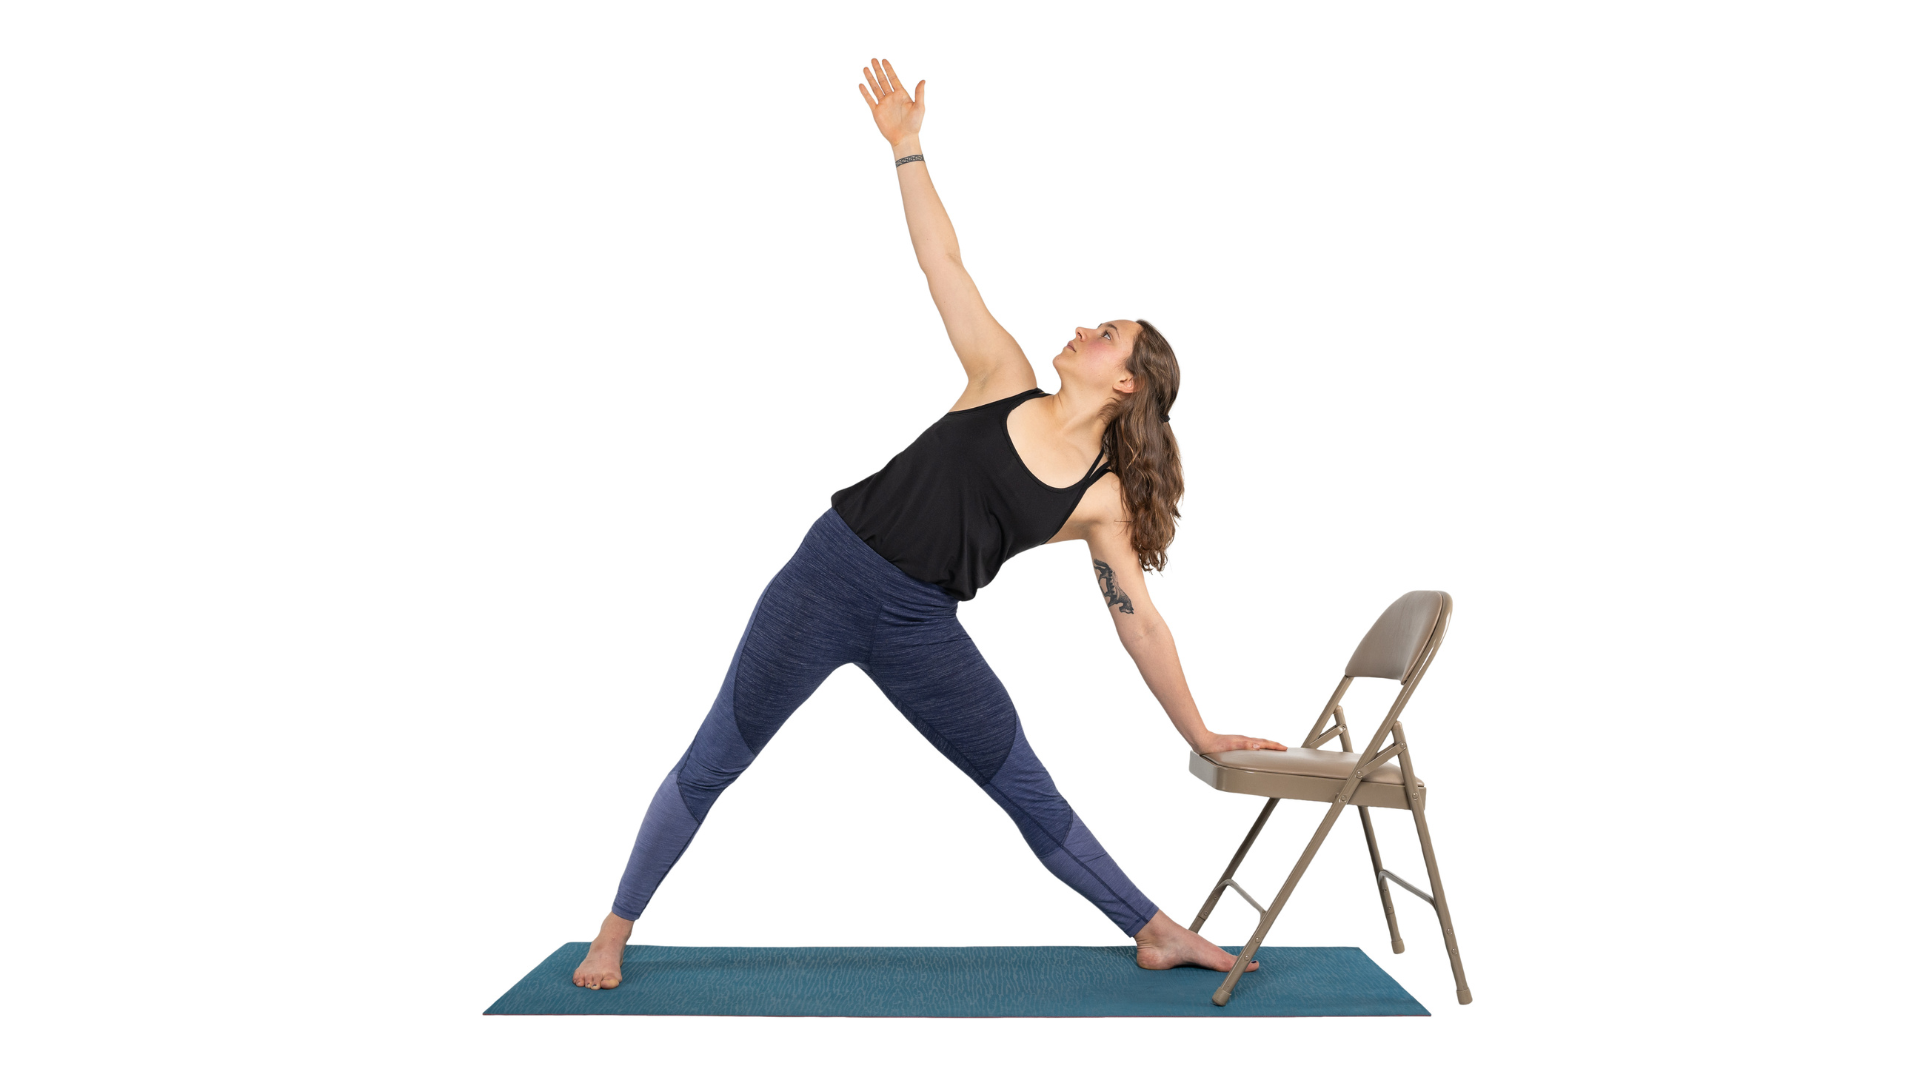 Triangle Pose also known as Trikonasana Pose is a strengthening and lengthening pose.